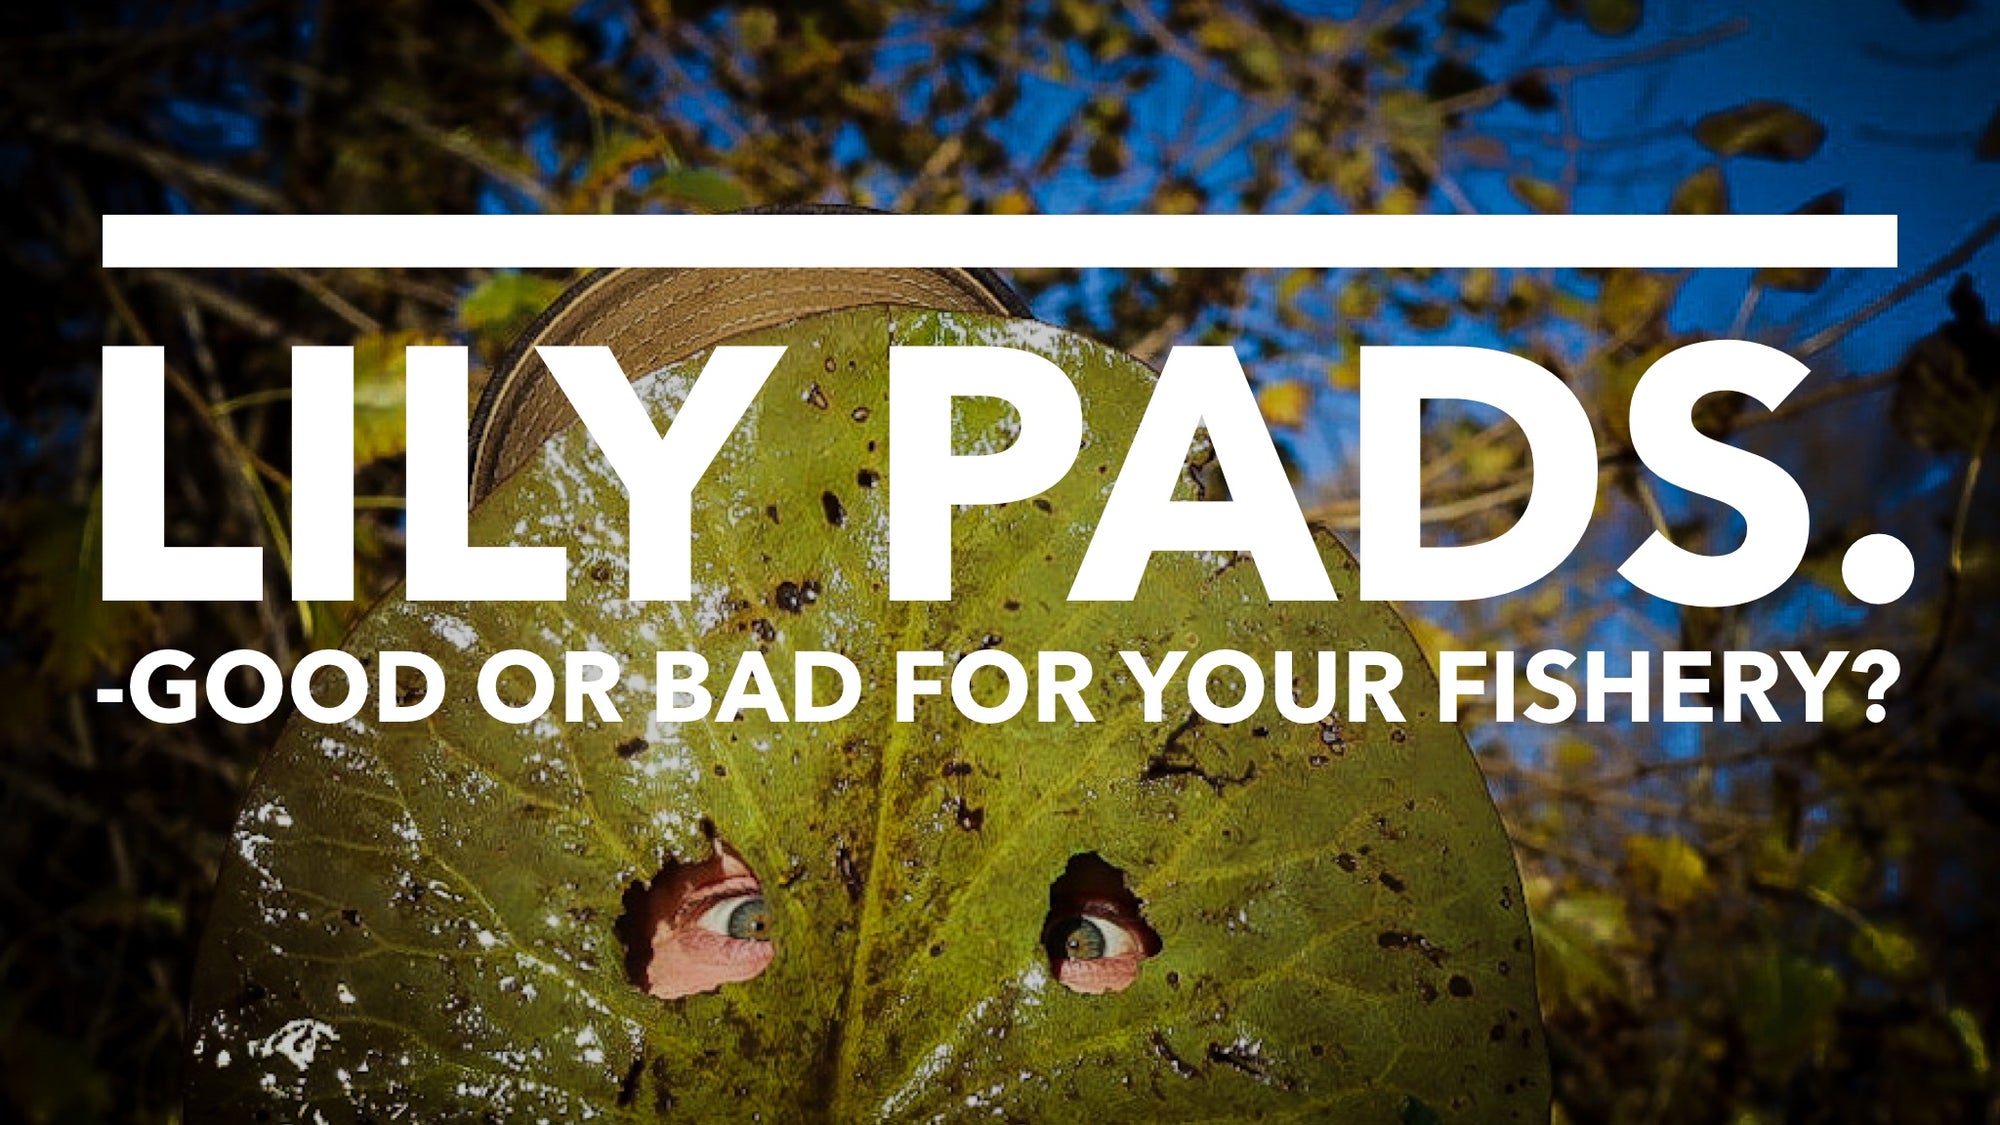 Lily pads - Good or bad for your fishery?